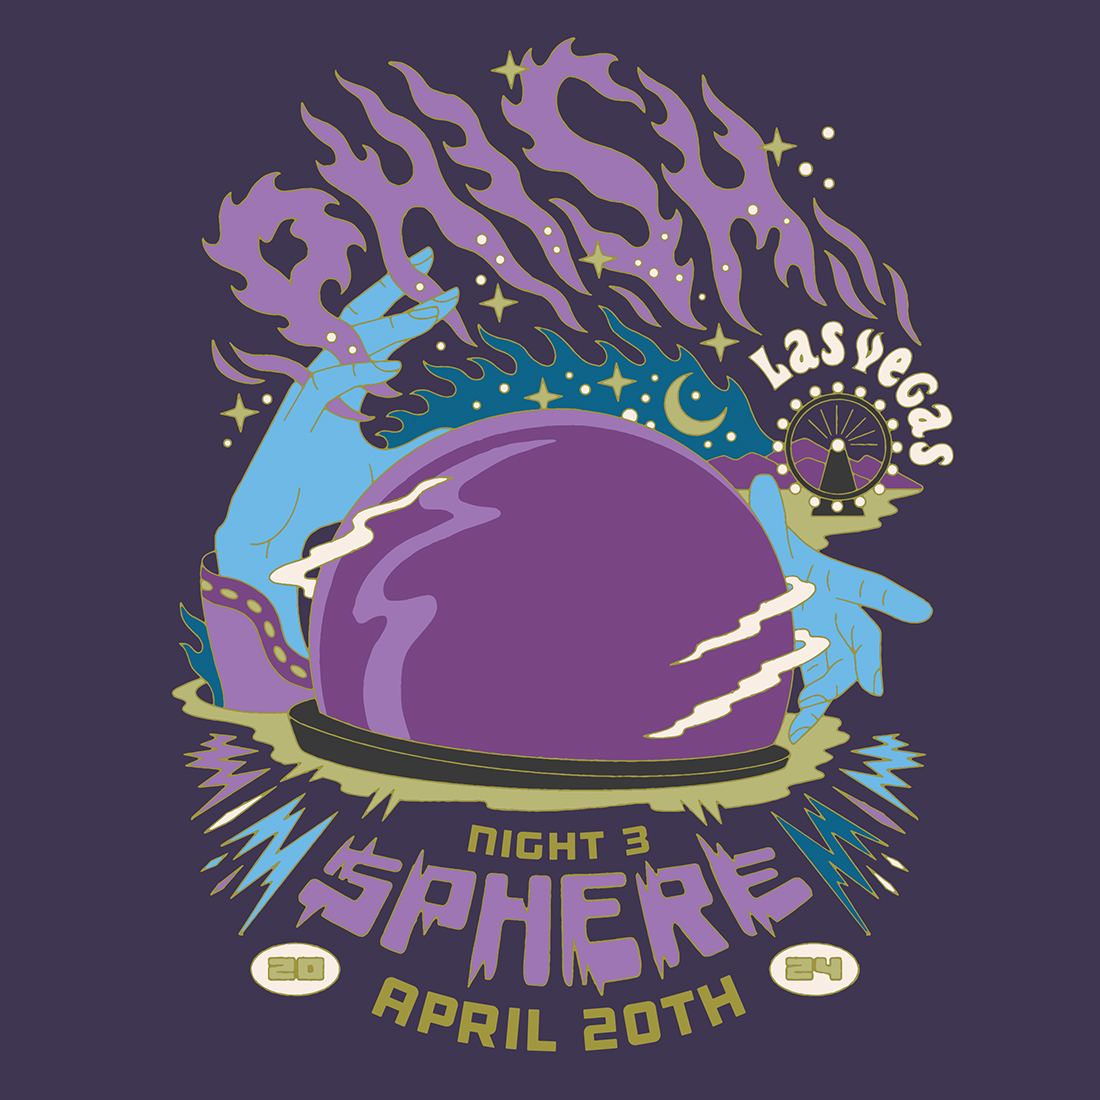 Tune in at Noon ET/9AM PT for a full replay of last night’s show from Sphere in Las Vegas 📡 Listen in your car or via the App: Siriusxm.us/PhishSXM